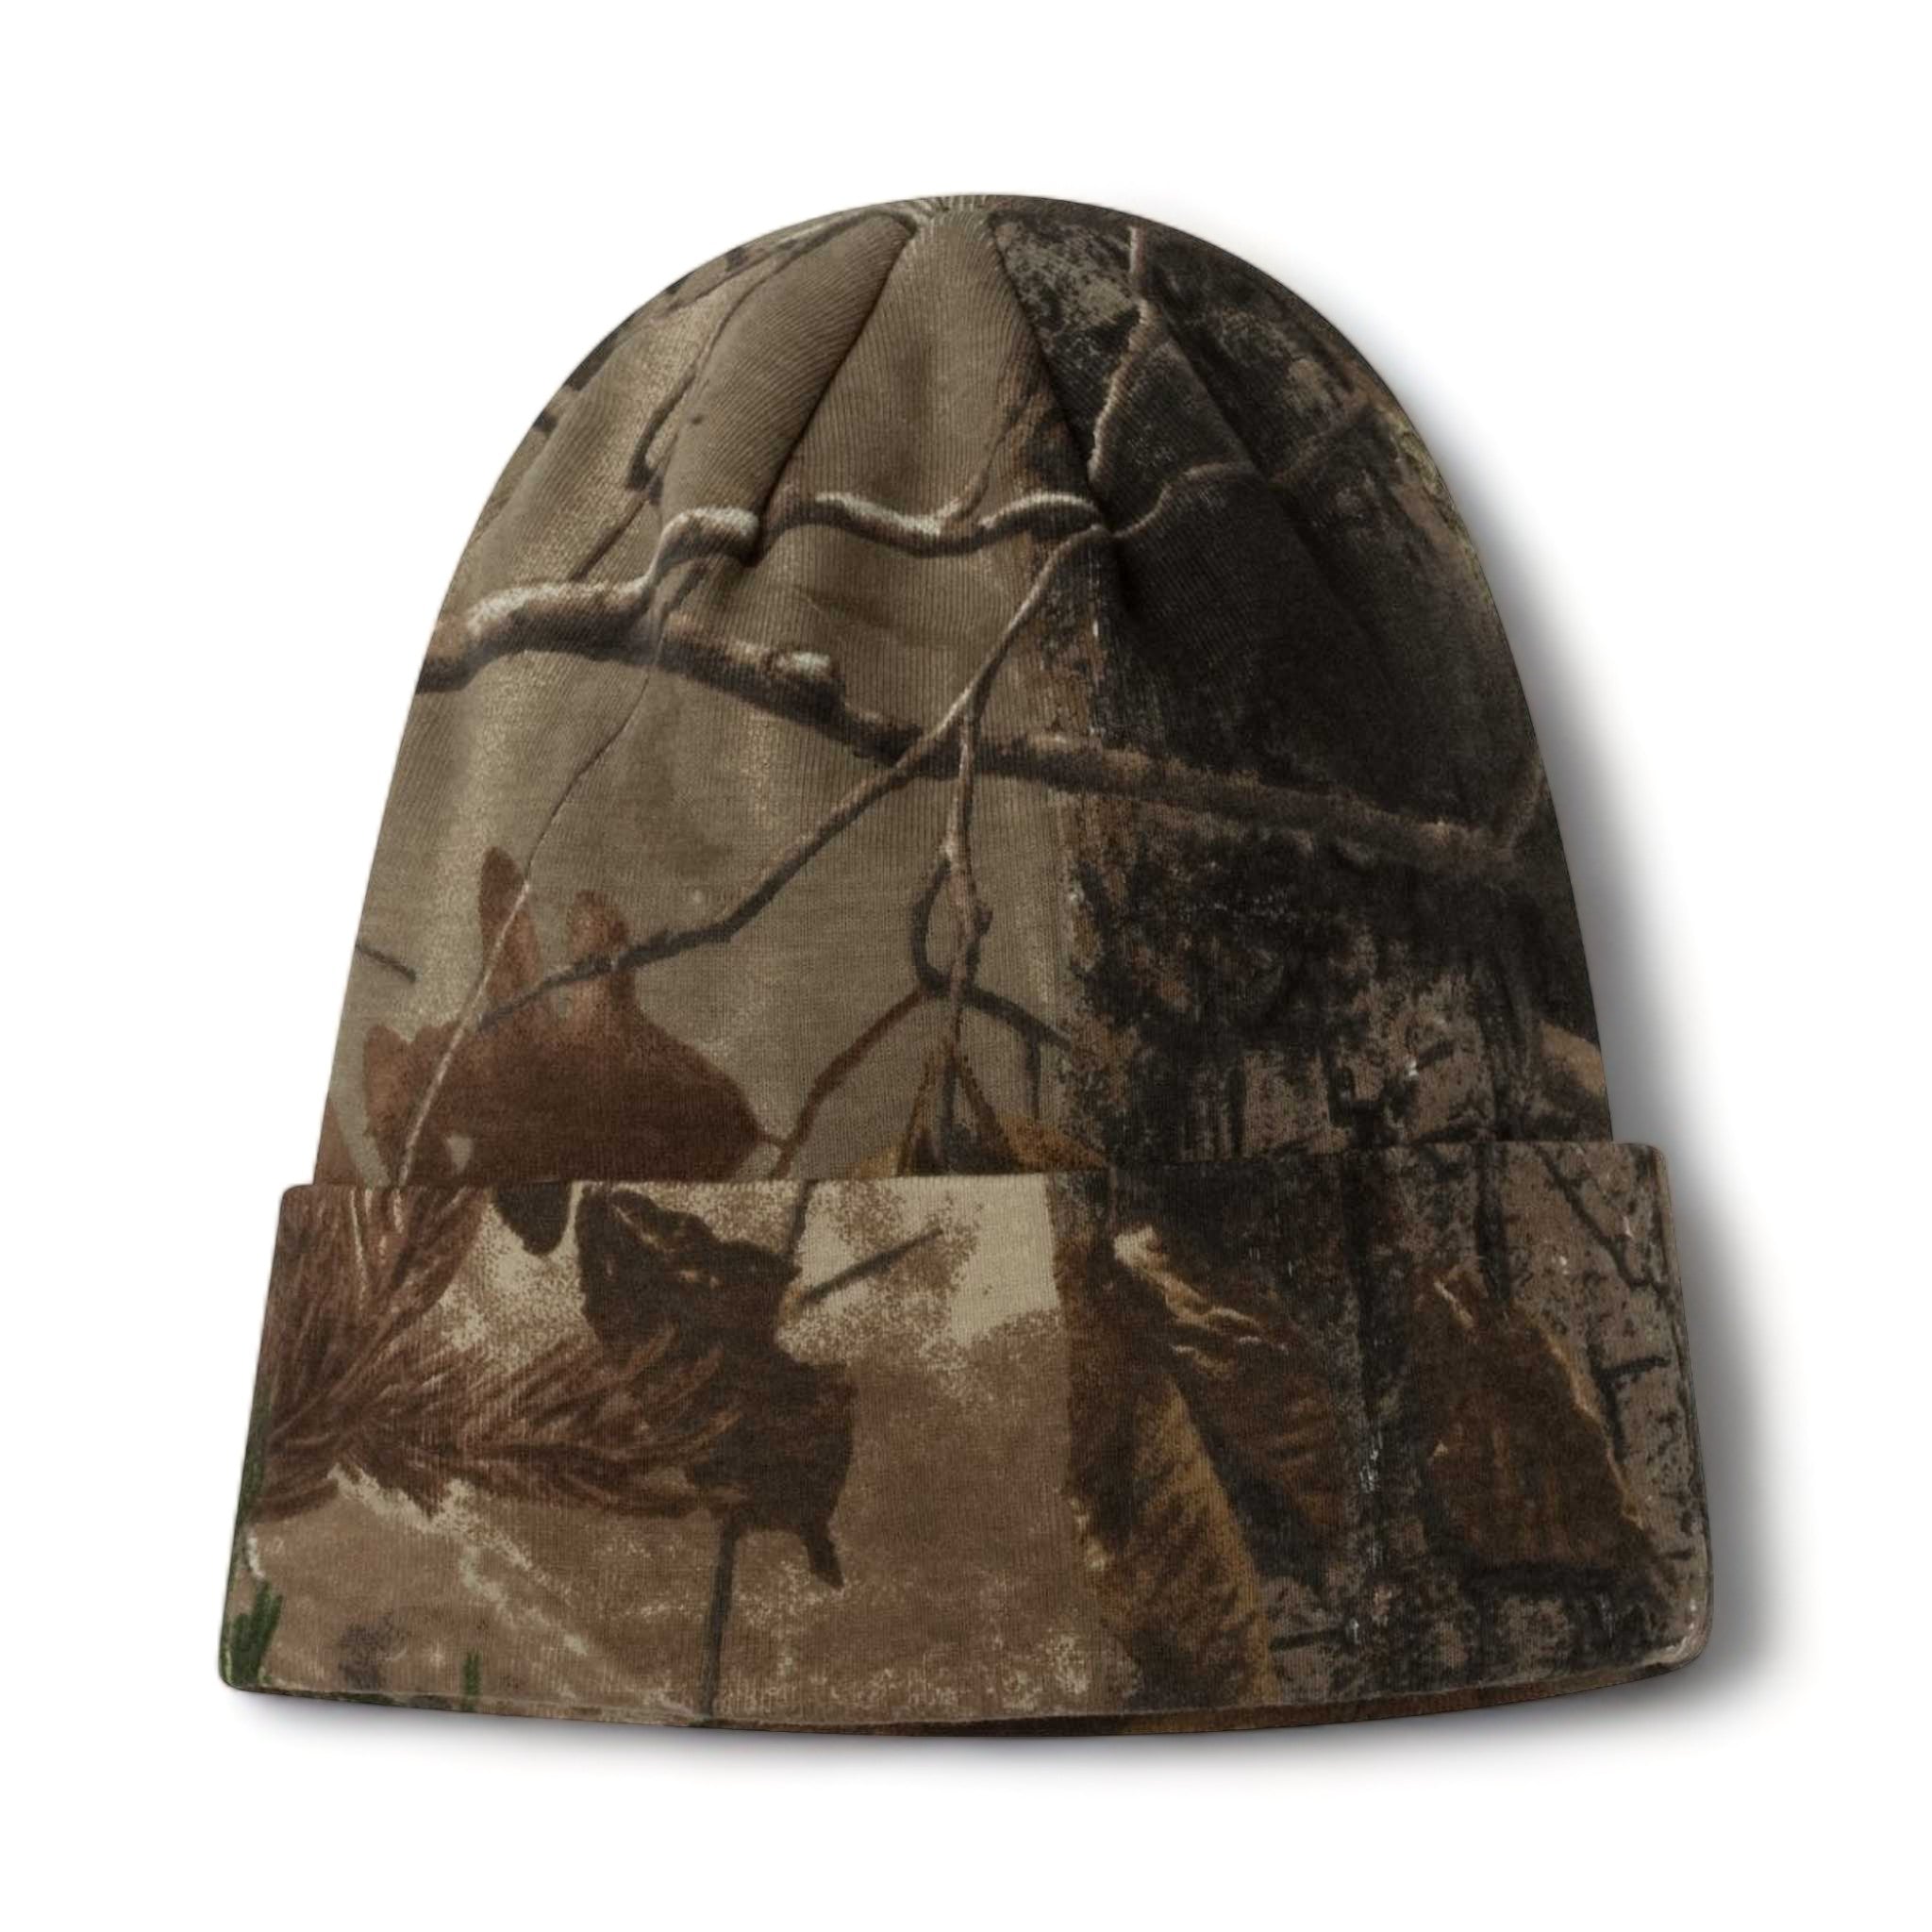 Front view of Kati LCB12 custom hat in realtree all purpose